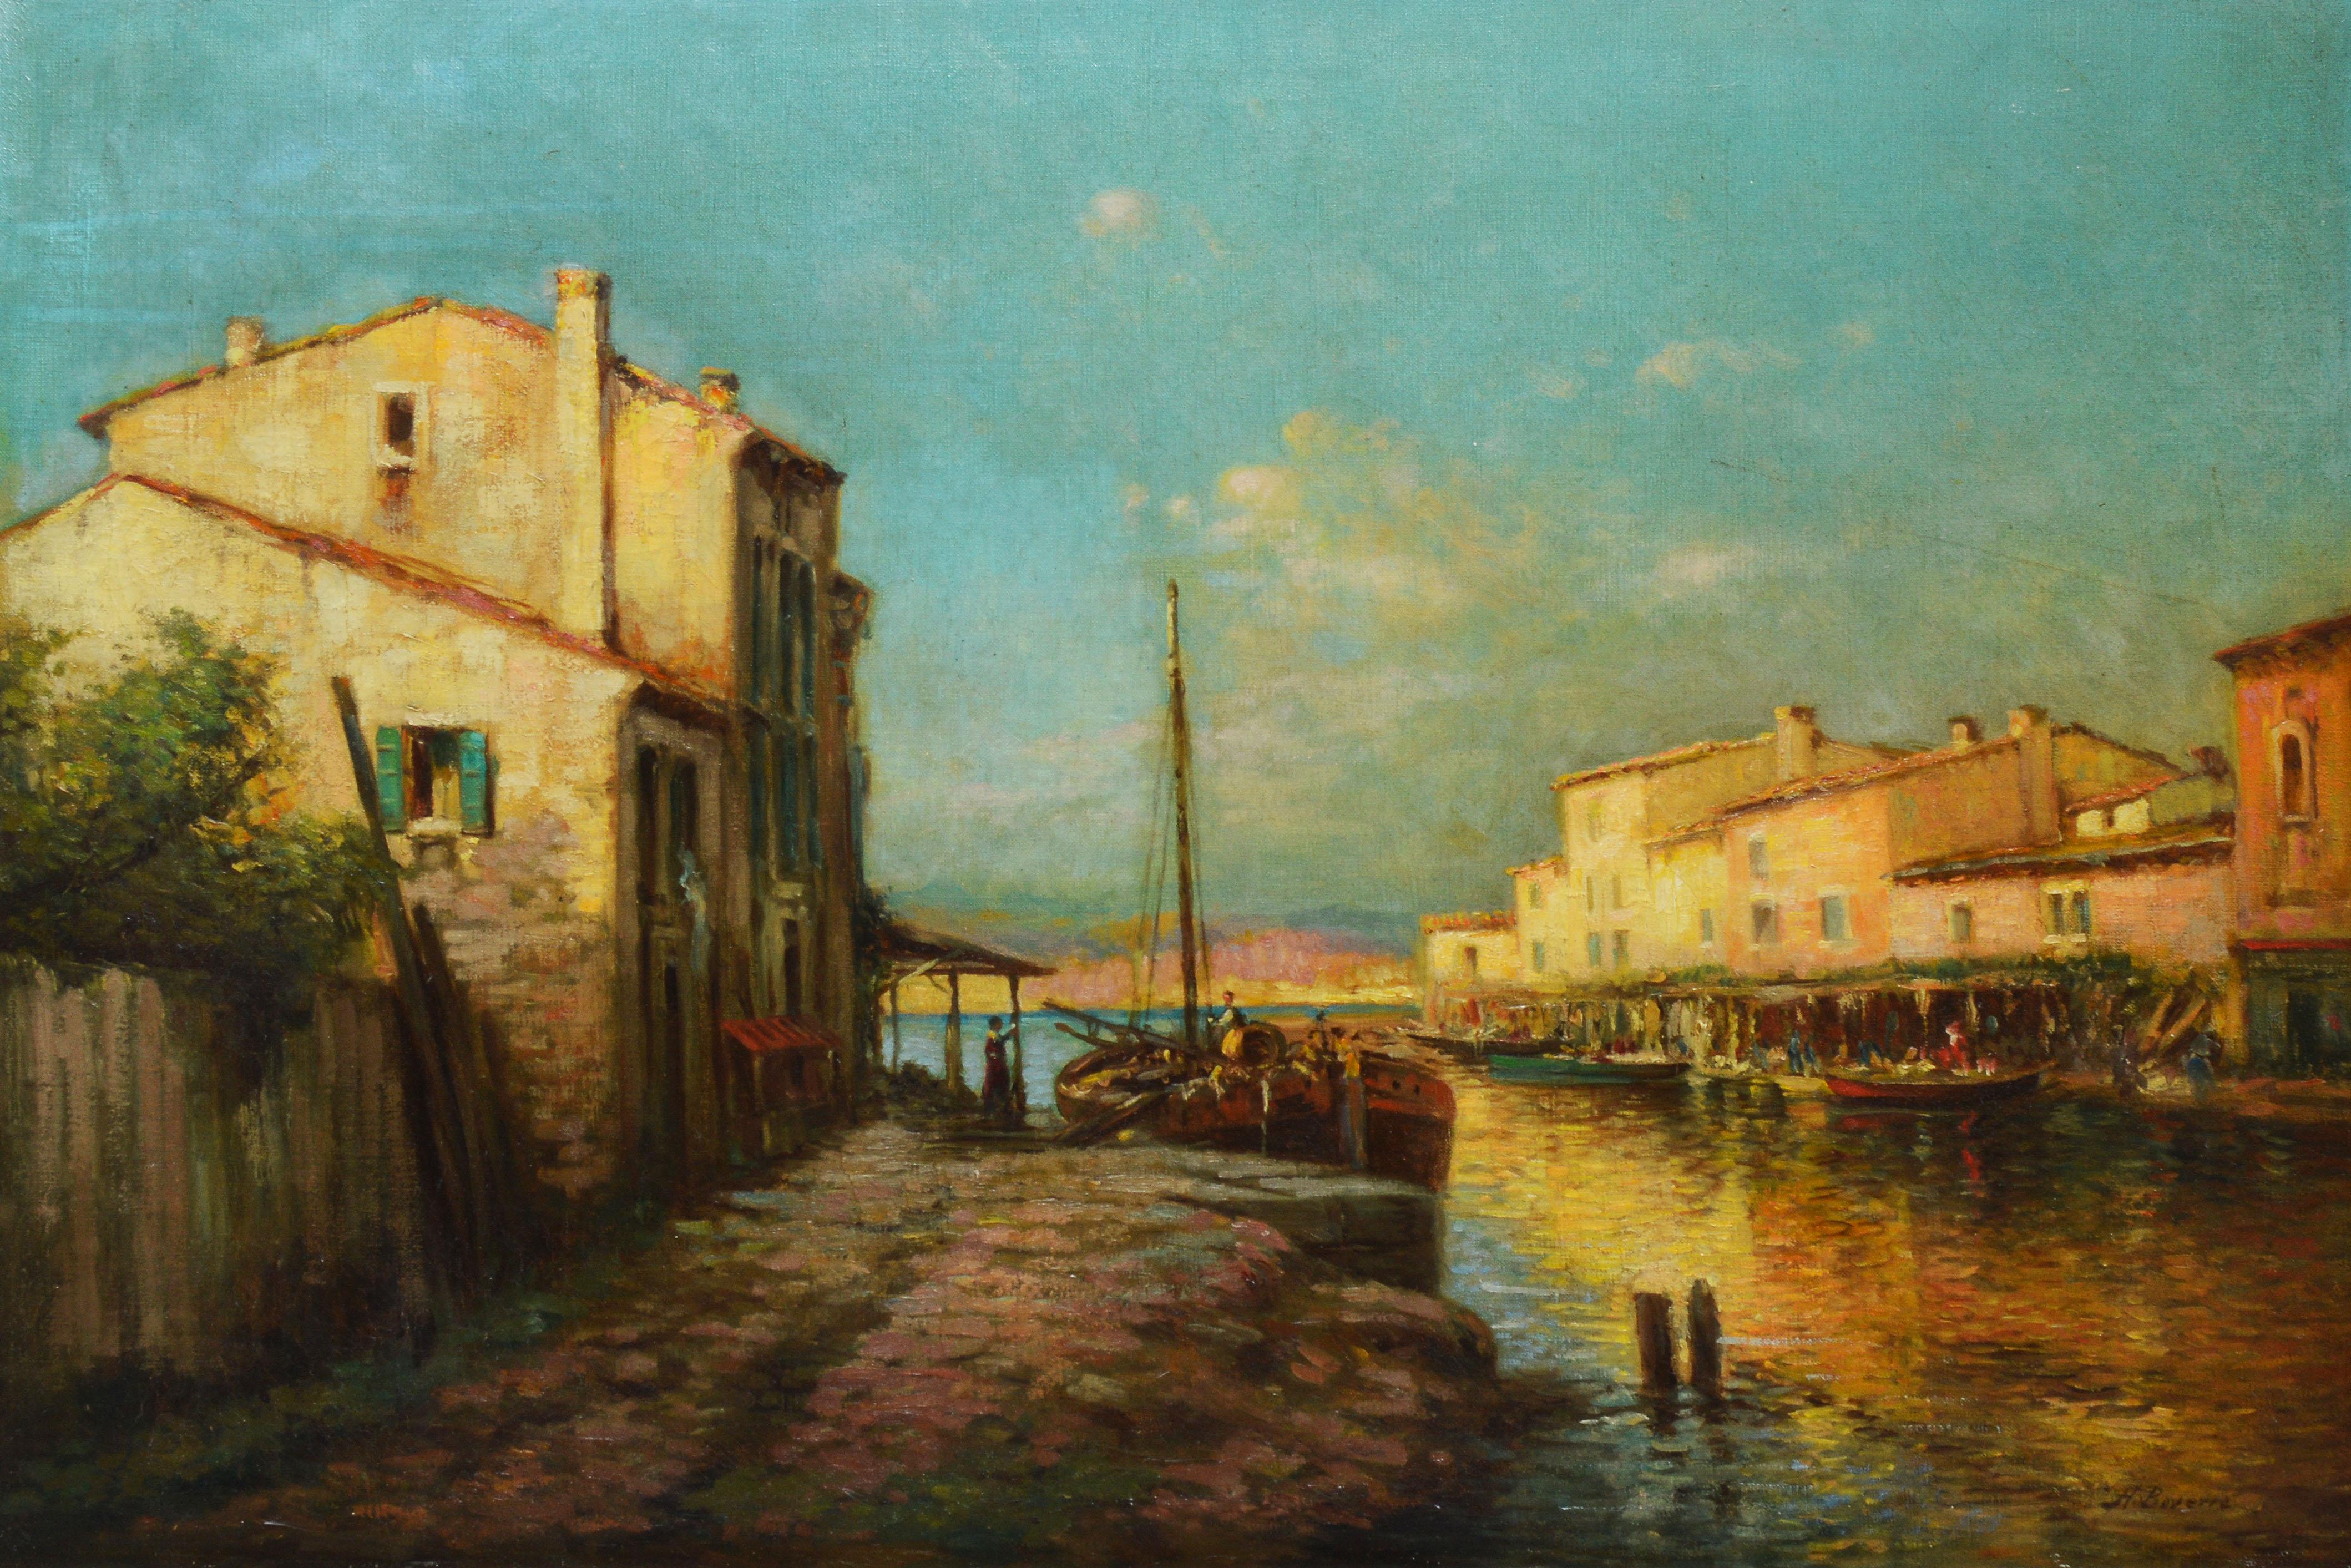 Antique Italian impressionist sunset view of Venice, Italy.  Oil on canvas, circa 1900.  Signed.  Displayed in a period giltwood frame.  Image, 32